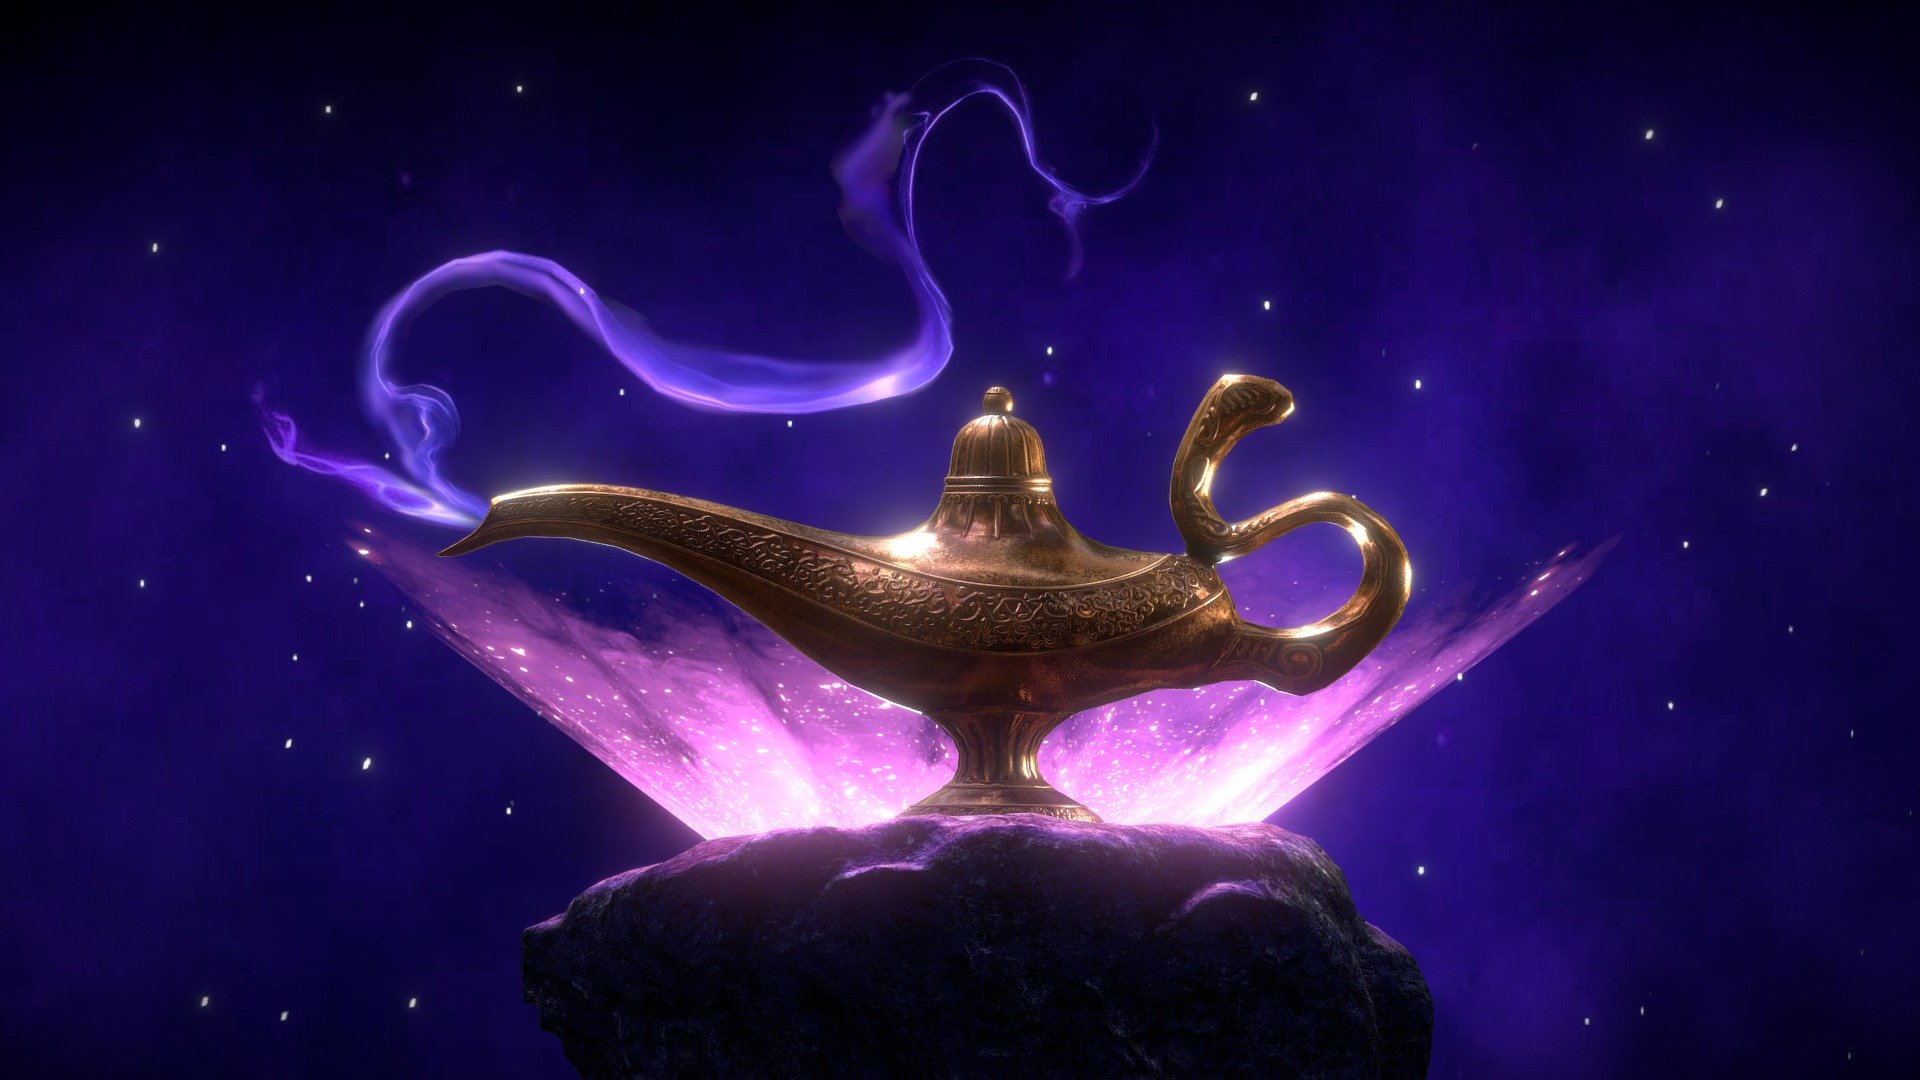 Aladdin's folk tale most probably my favorate tale from the Book of One Thousand and One Nights, All i wated in my childhood was this magical lamp with unlimited wishes :P

Modelled with Maya, sculpted with Zbrush &amp; Textured with Substance painter.

My entry for FairyTaleChallenge - Aladdin's Magic Lamp - 3D model by Alok (@alok.aks50) 3d model